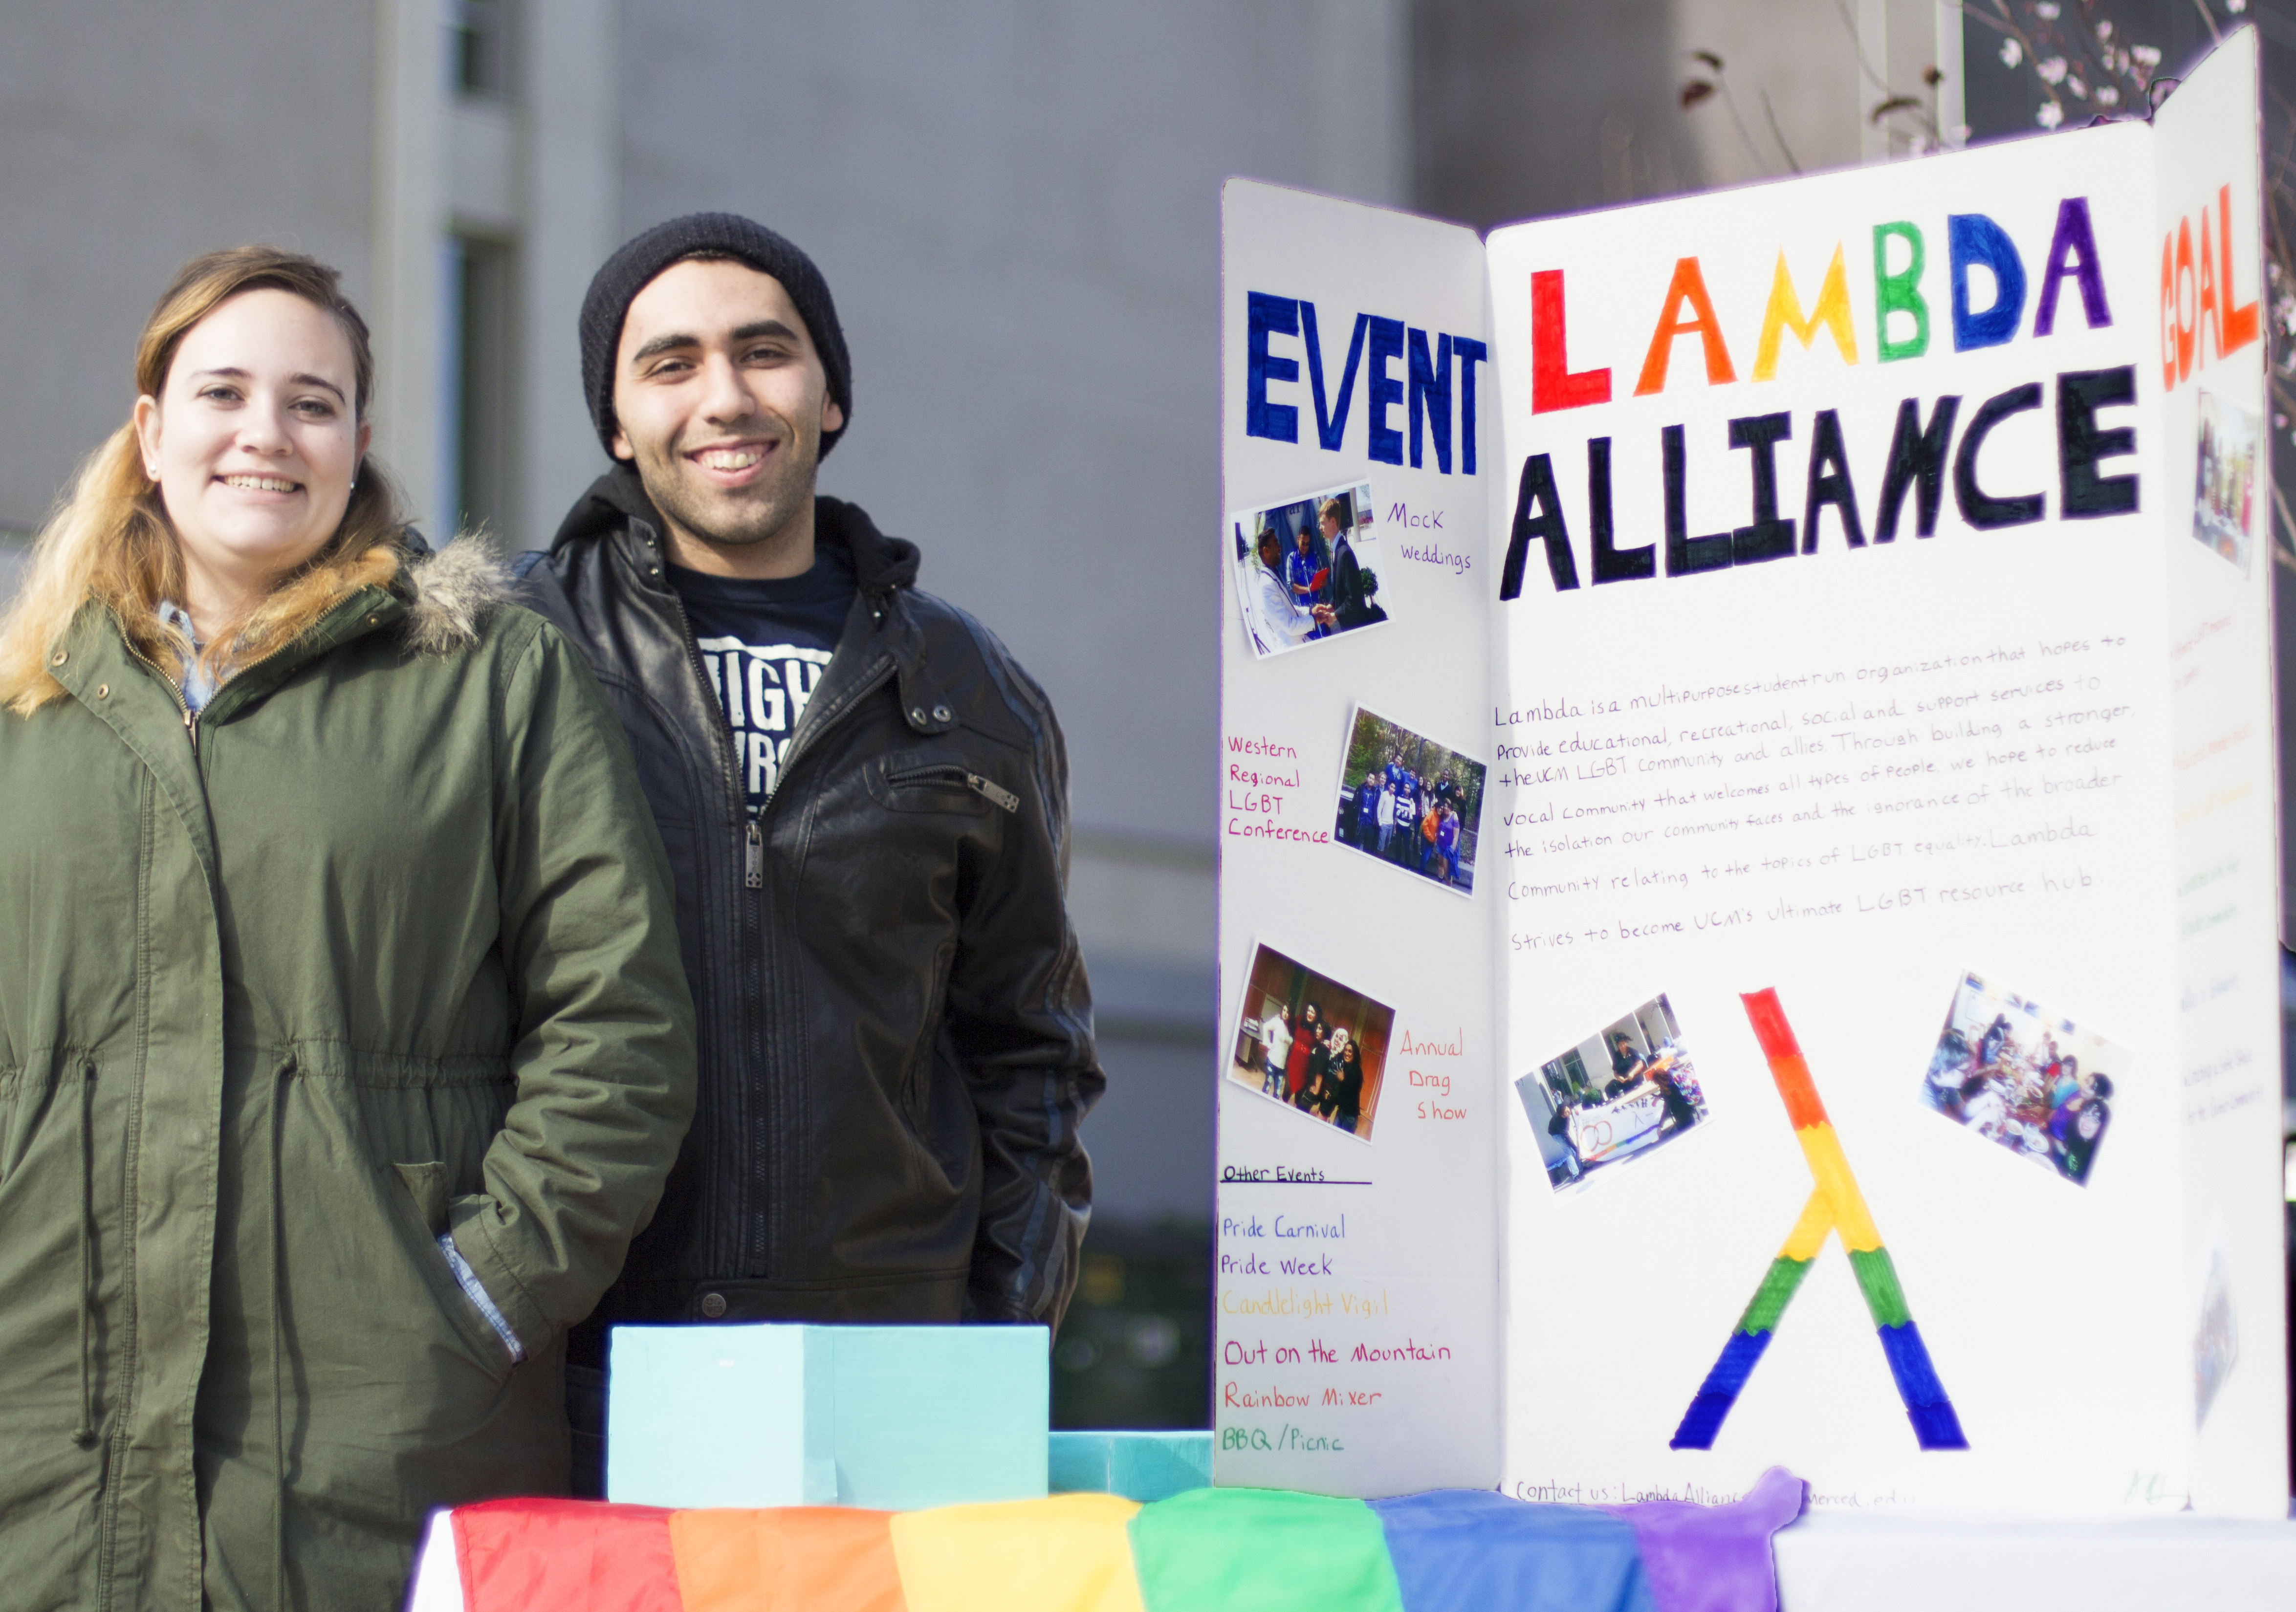 Lambda Alliance focuses on LGBT culture and heritage.